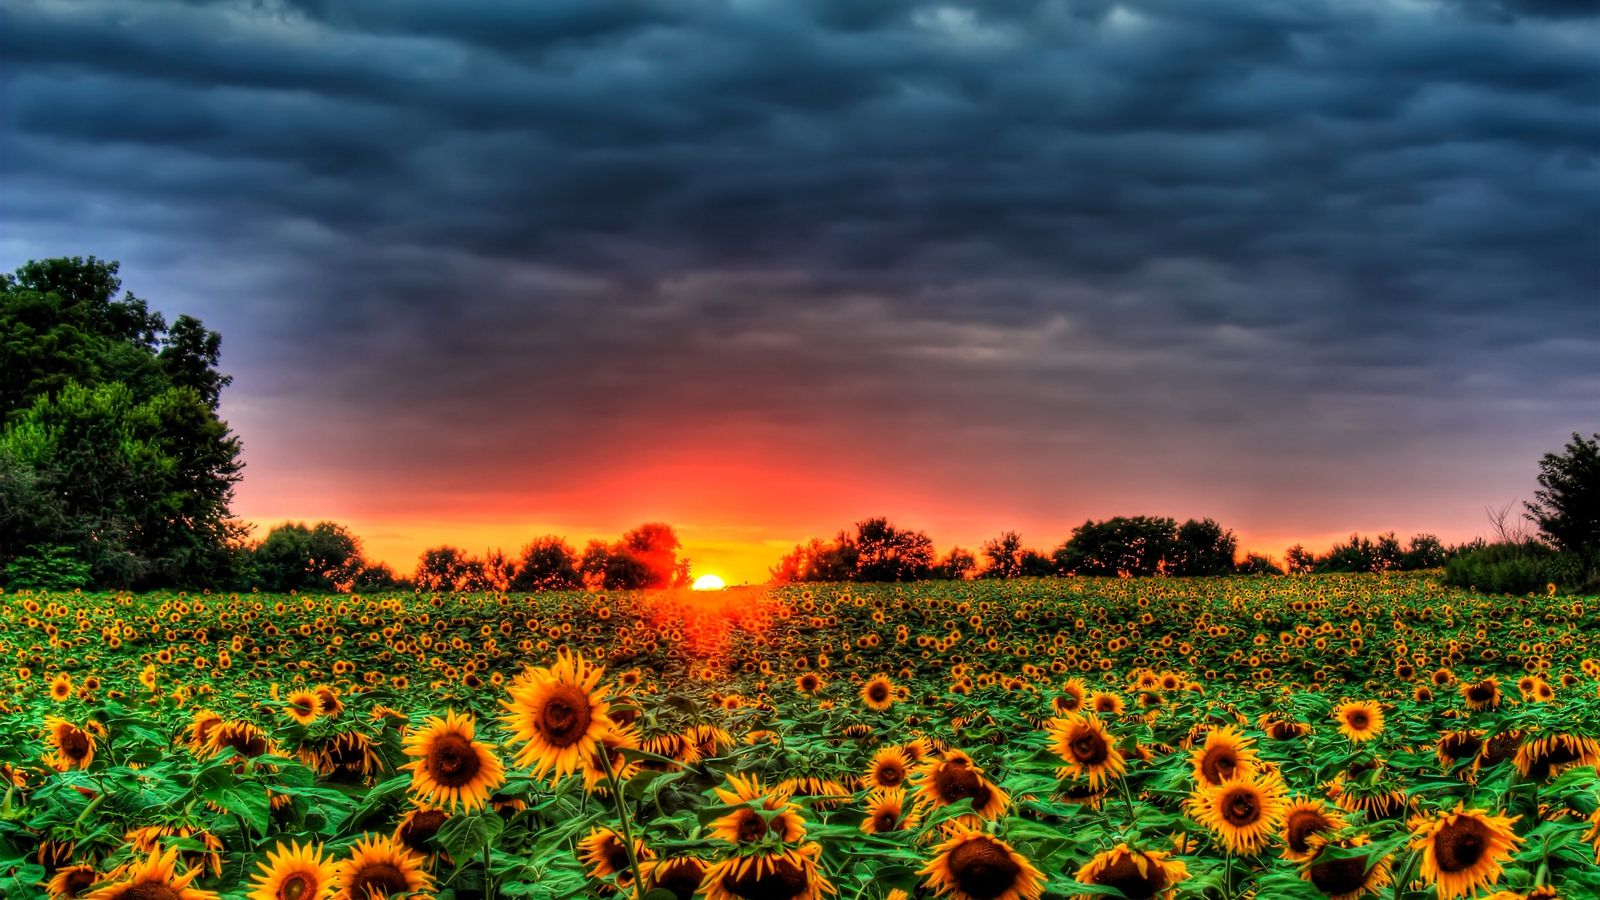 Autumn With Sunflowers Wallpapers Wallpaper Cave 8913